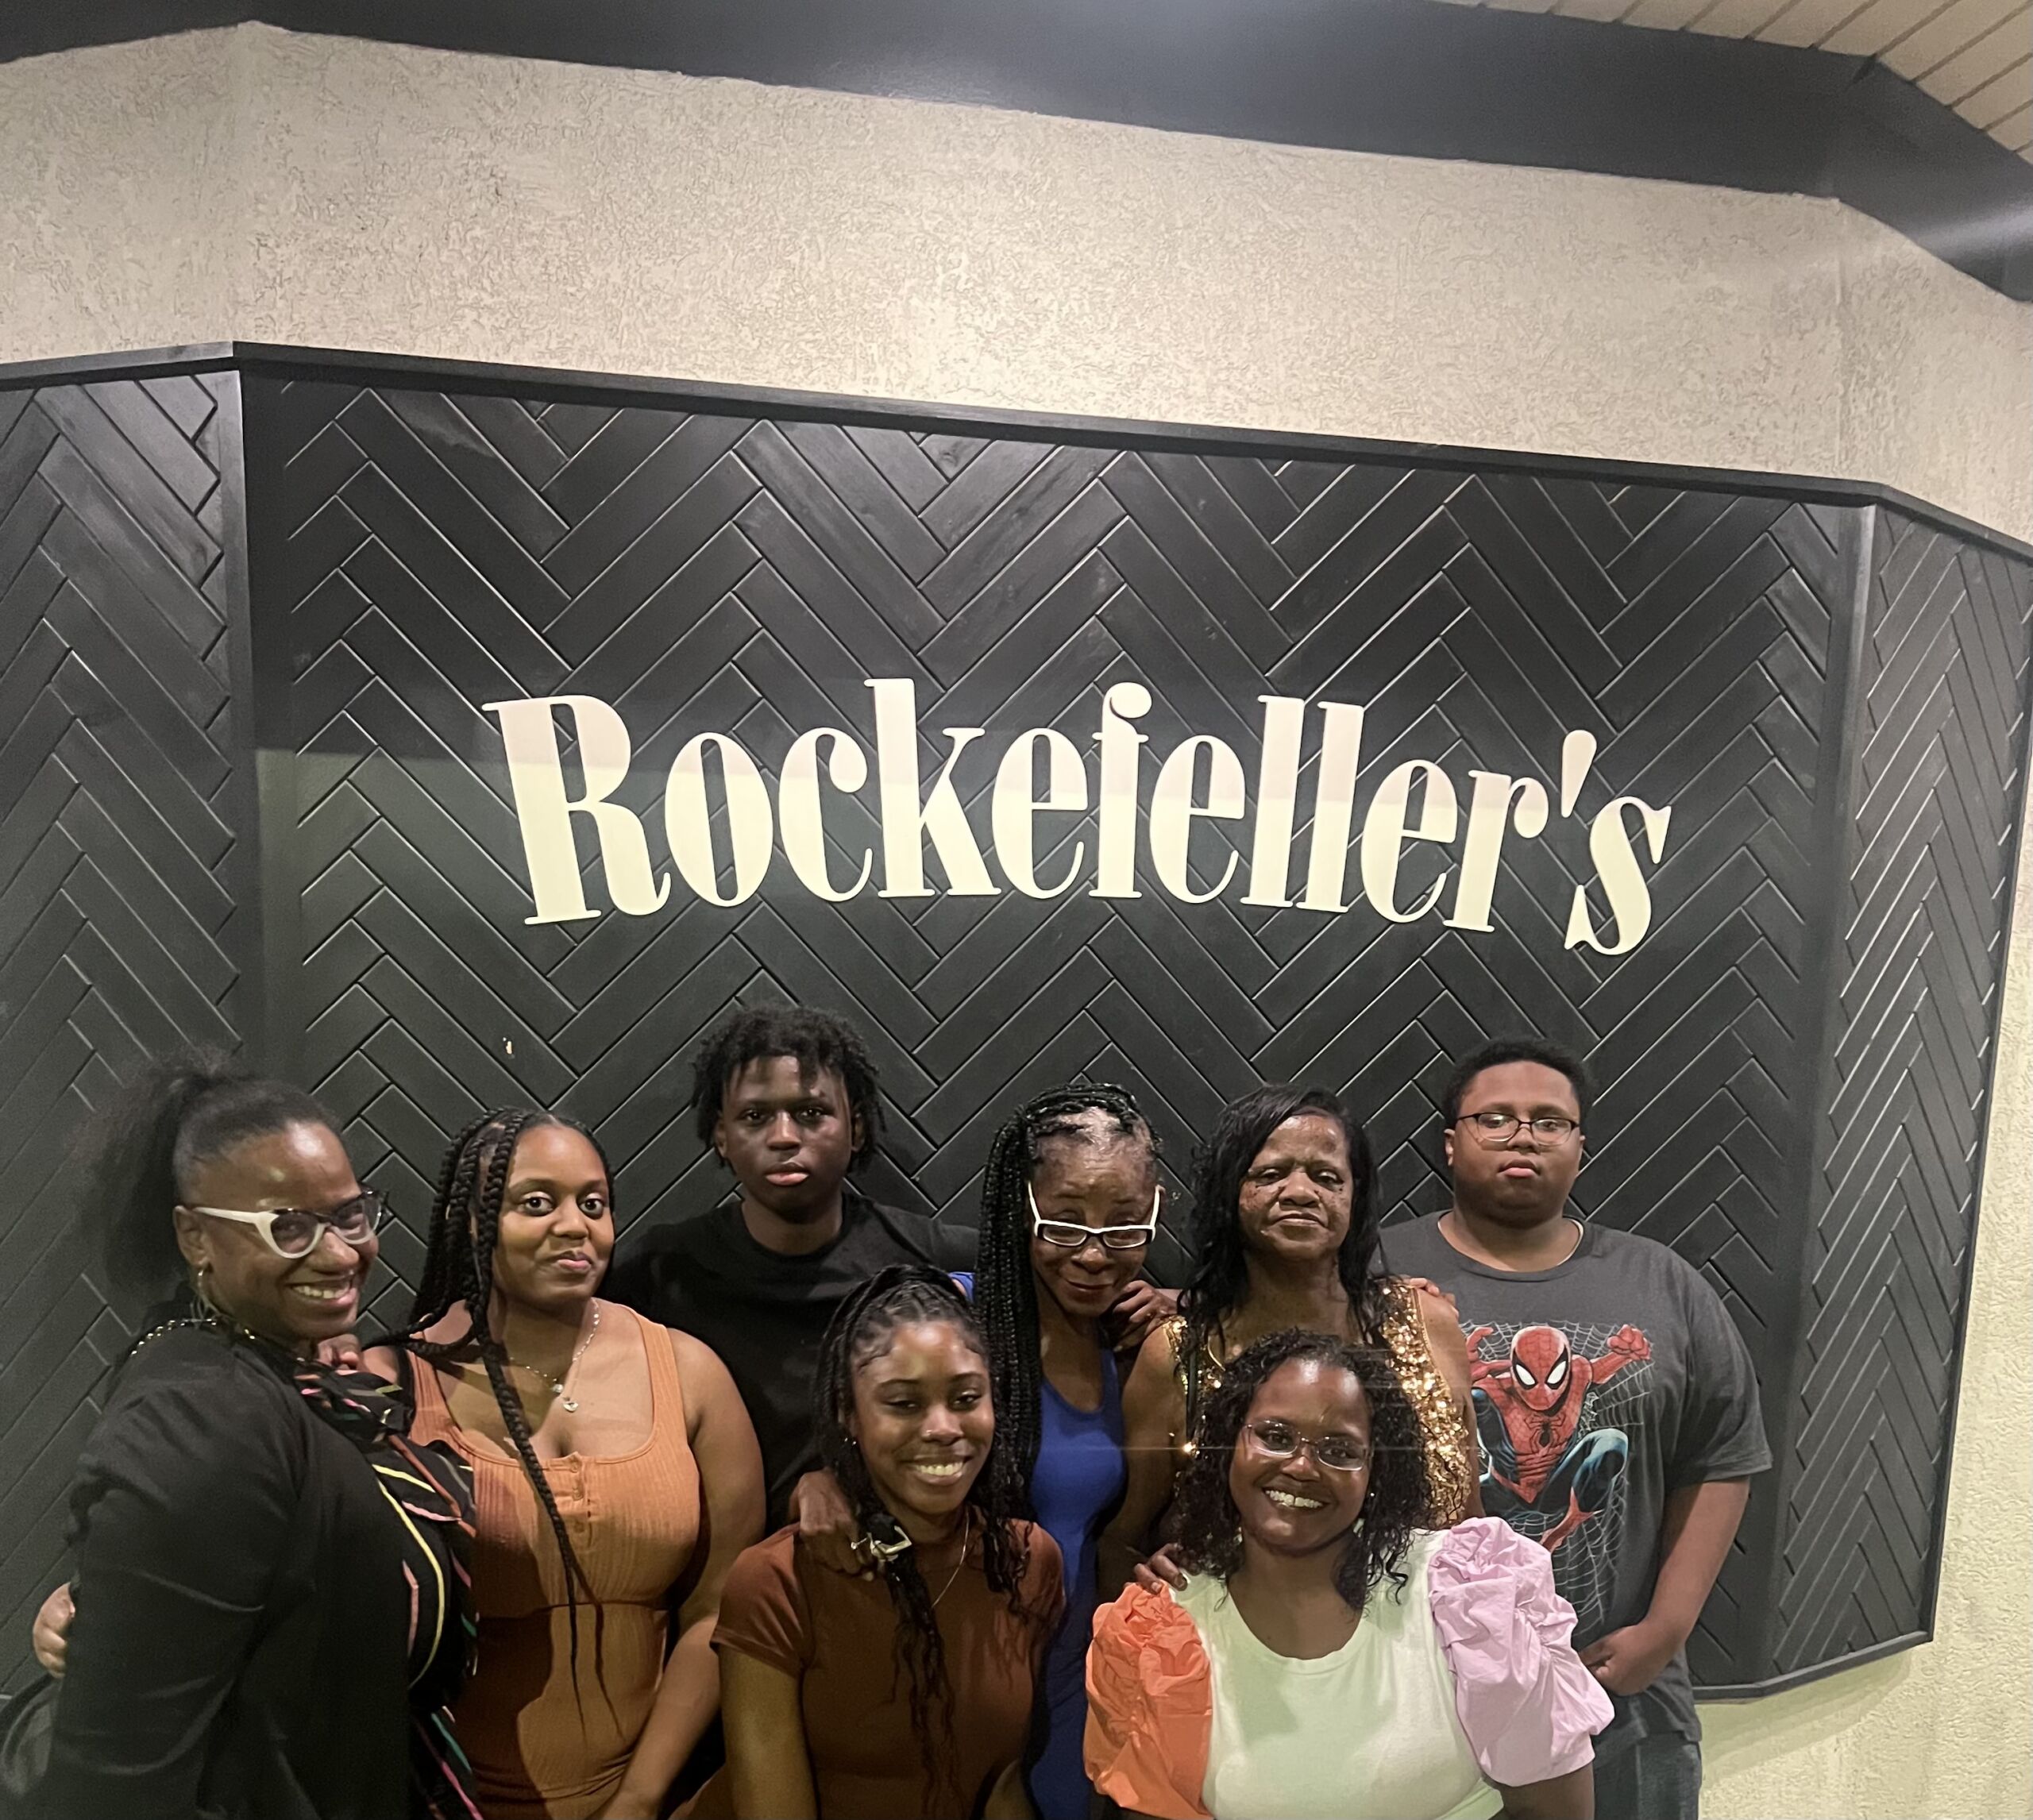 Photo shows Principal Kashawndra Wilson posing with her family in front of a black sign that has the word "Rockefeller's" on it in a bold white newspaper-like font.